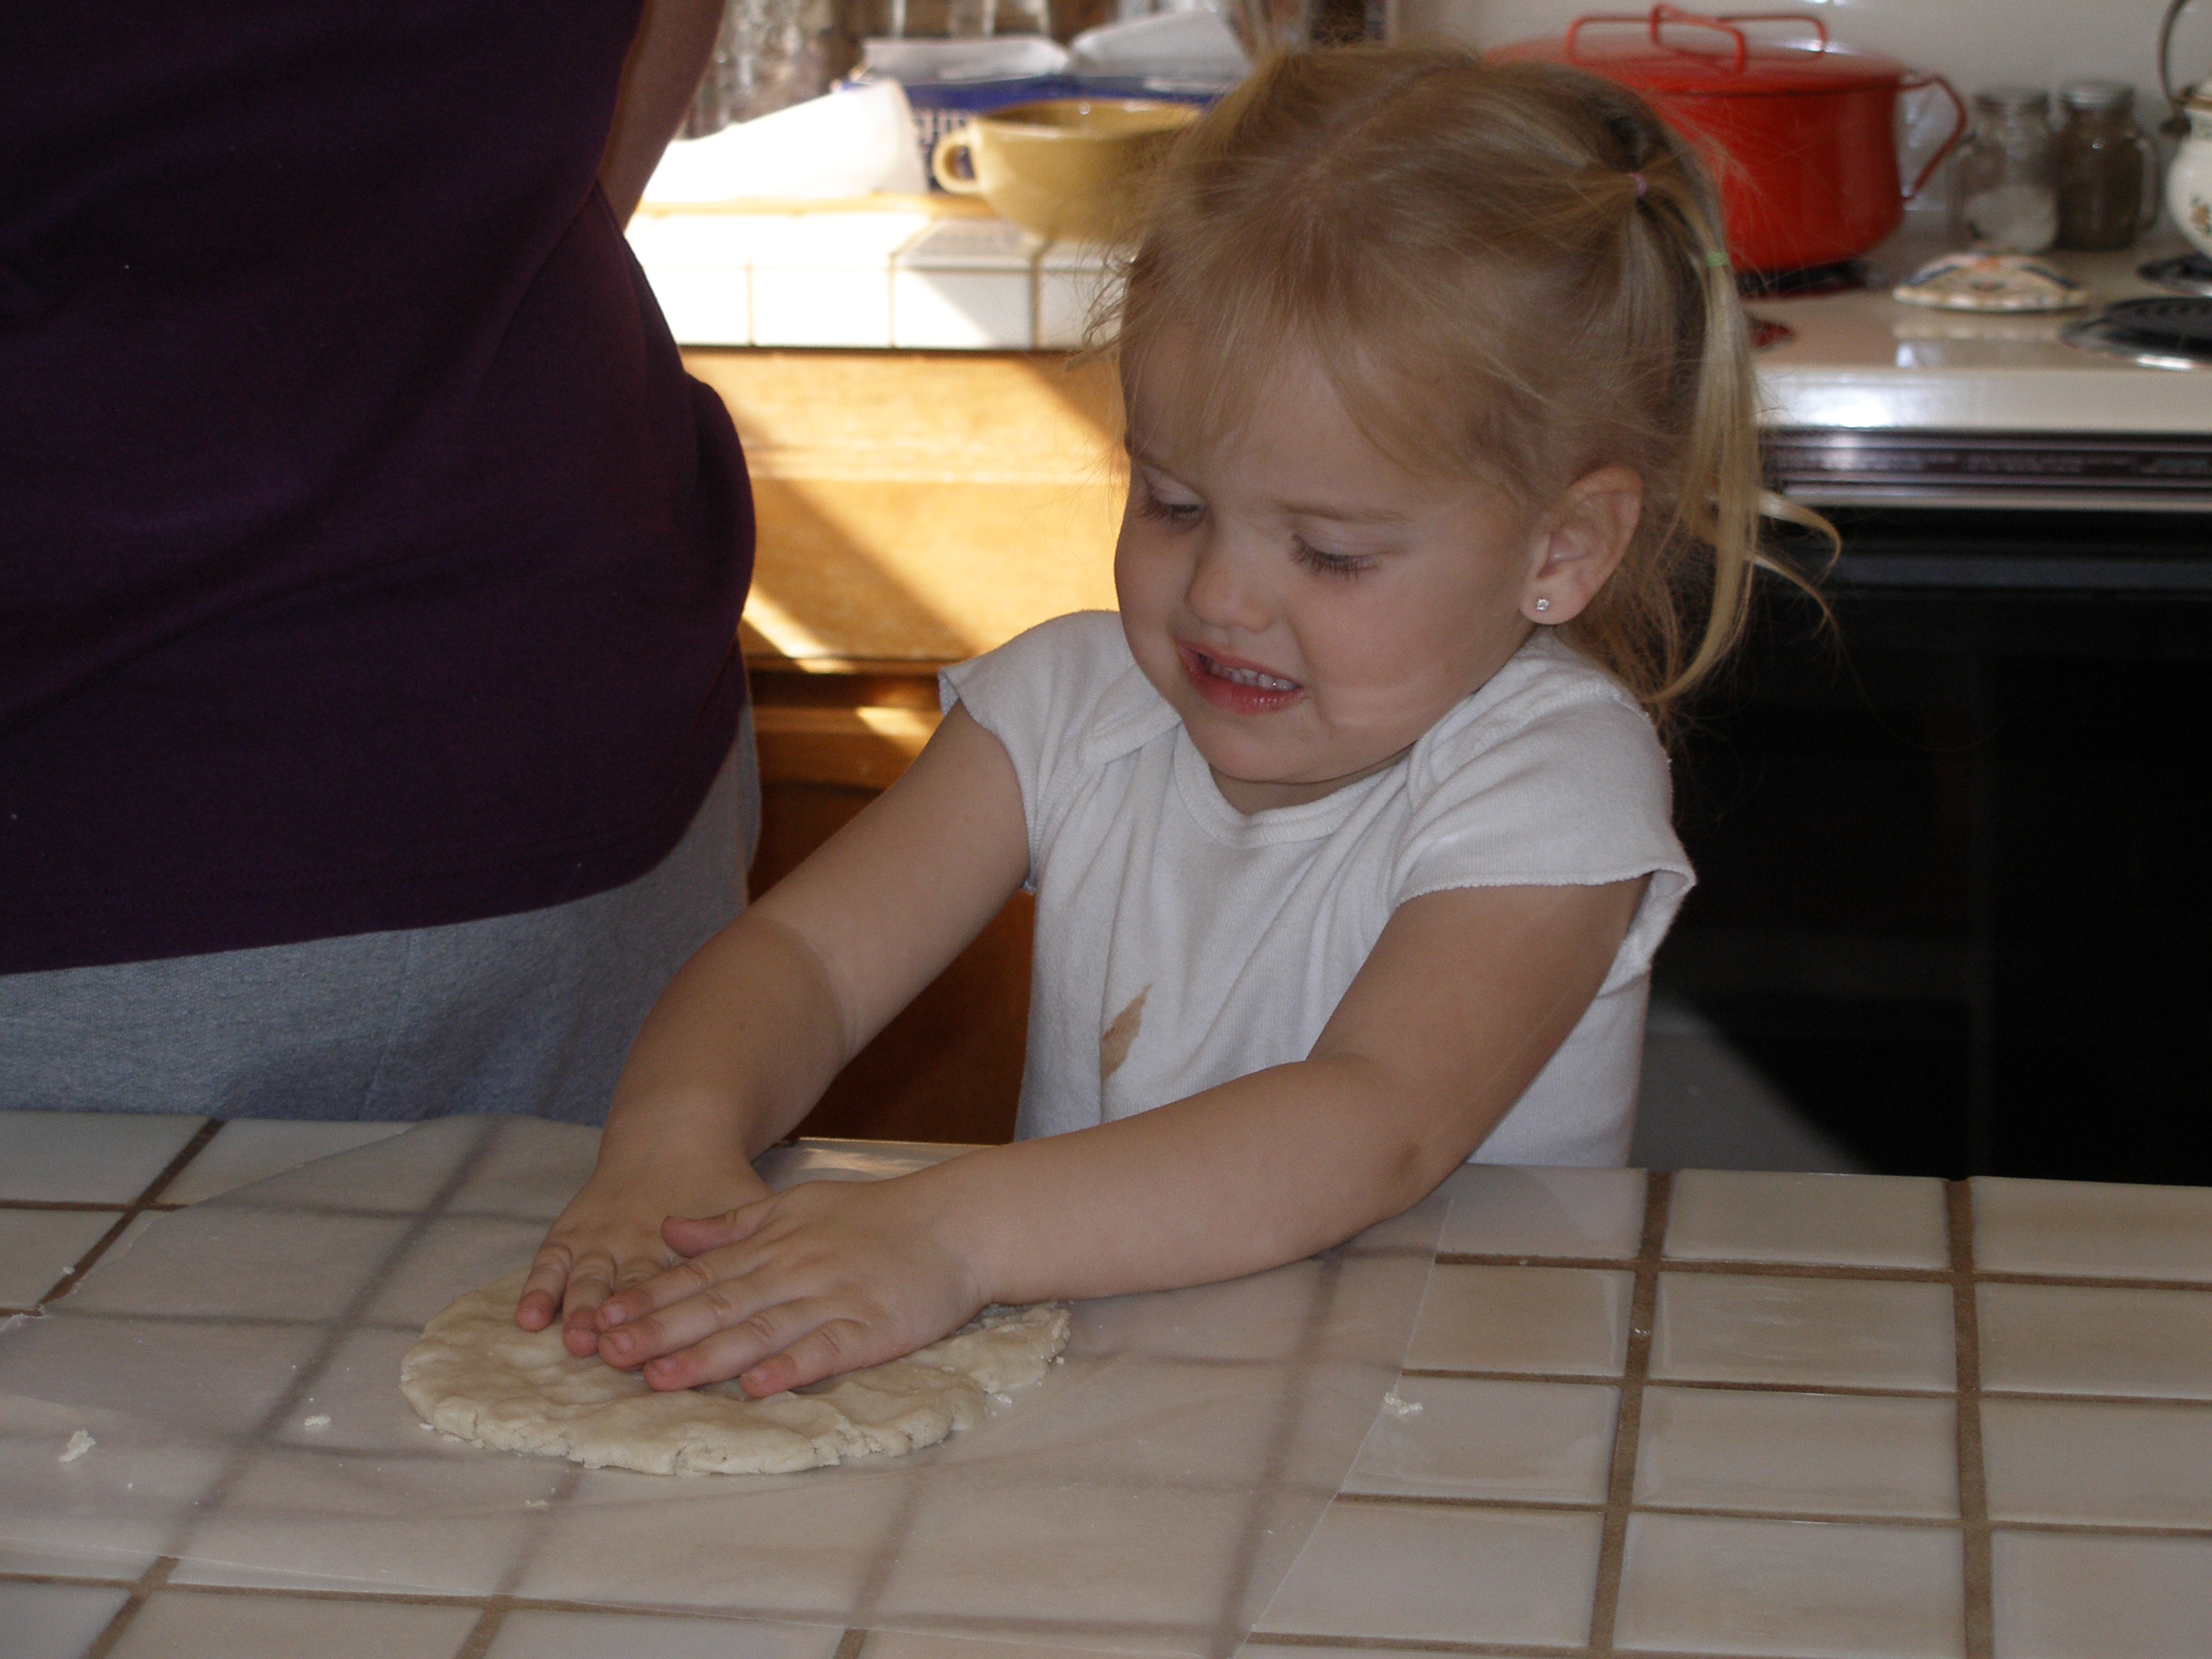 Baking with Aunt Patti